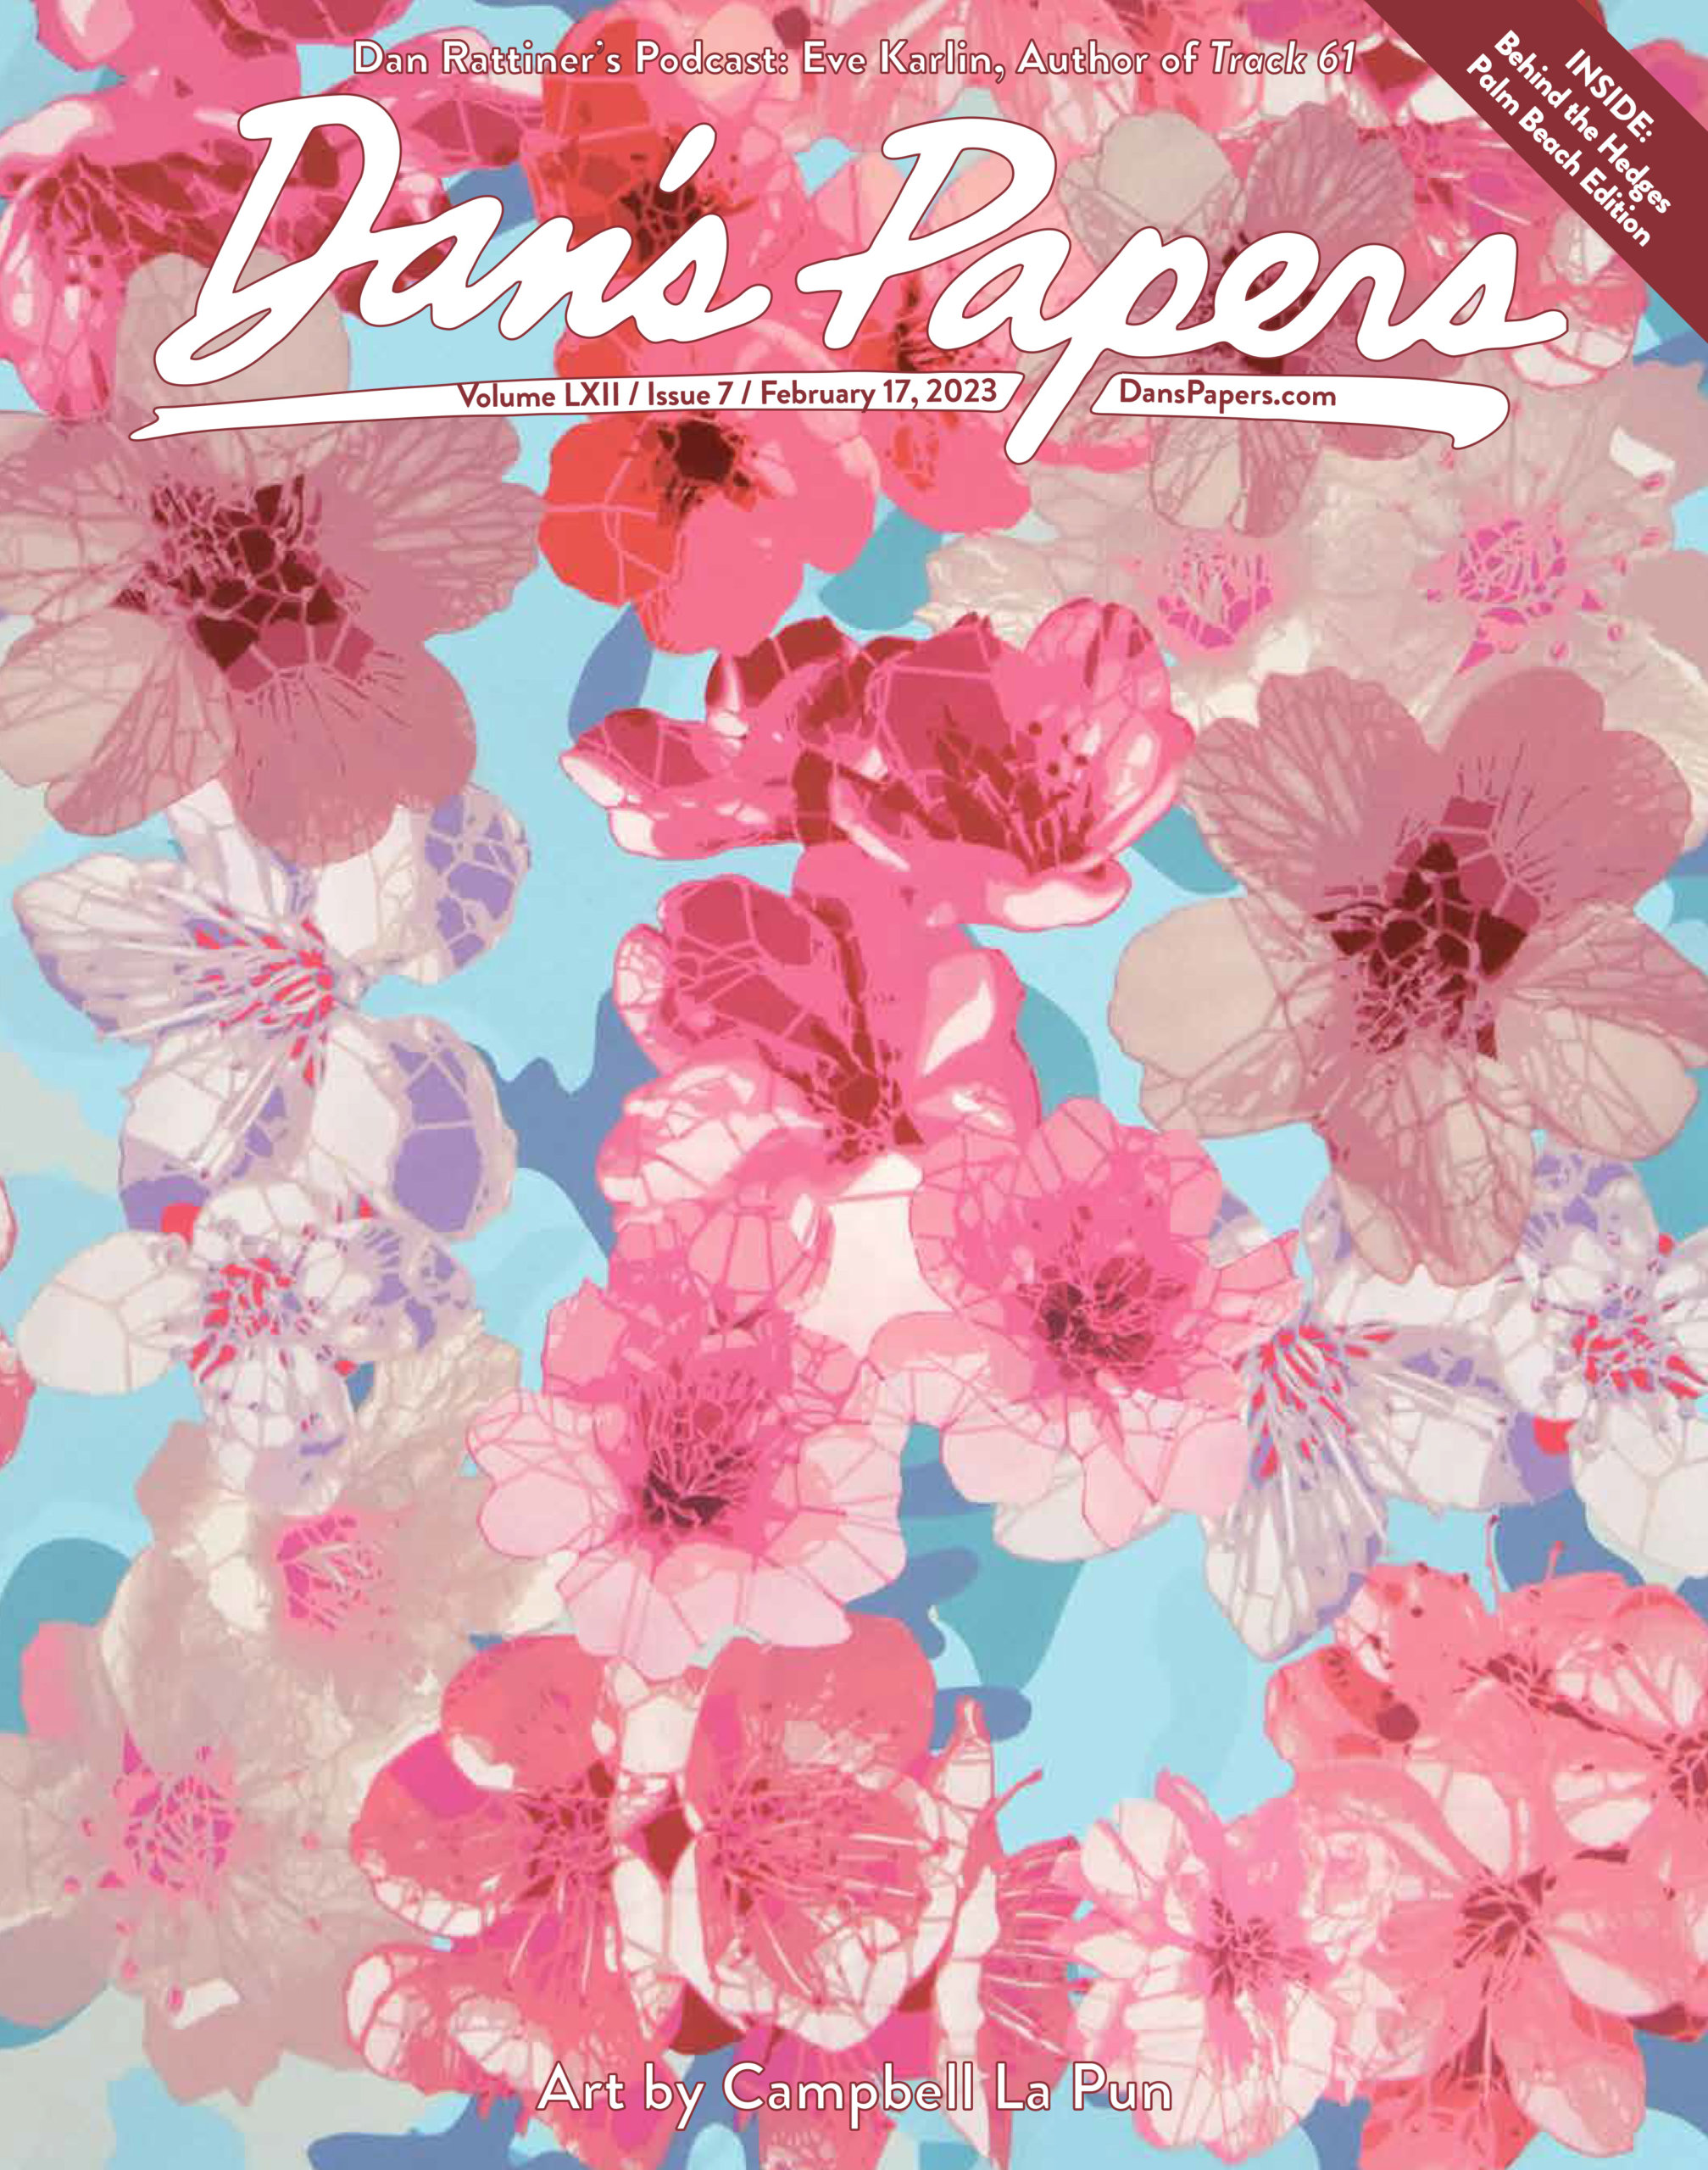 February 17, 2023 Dan's Papers cover art by Campbell La Pun